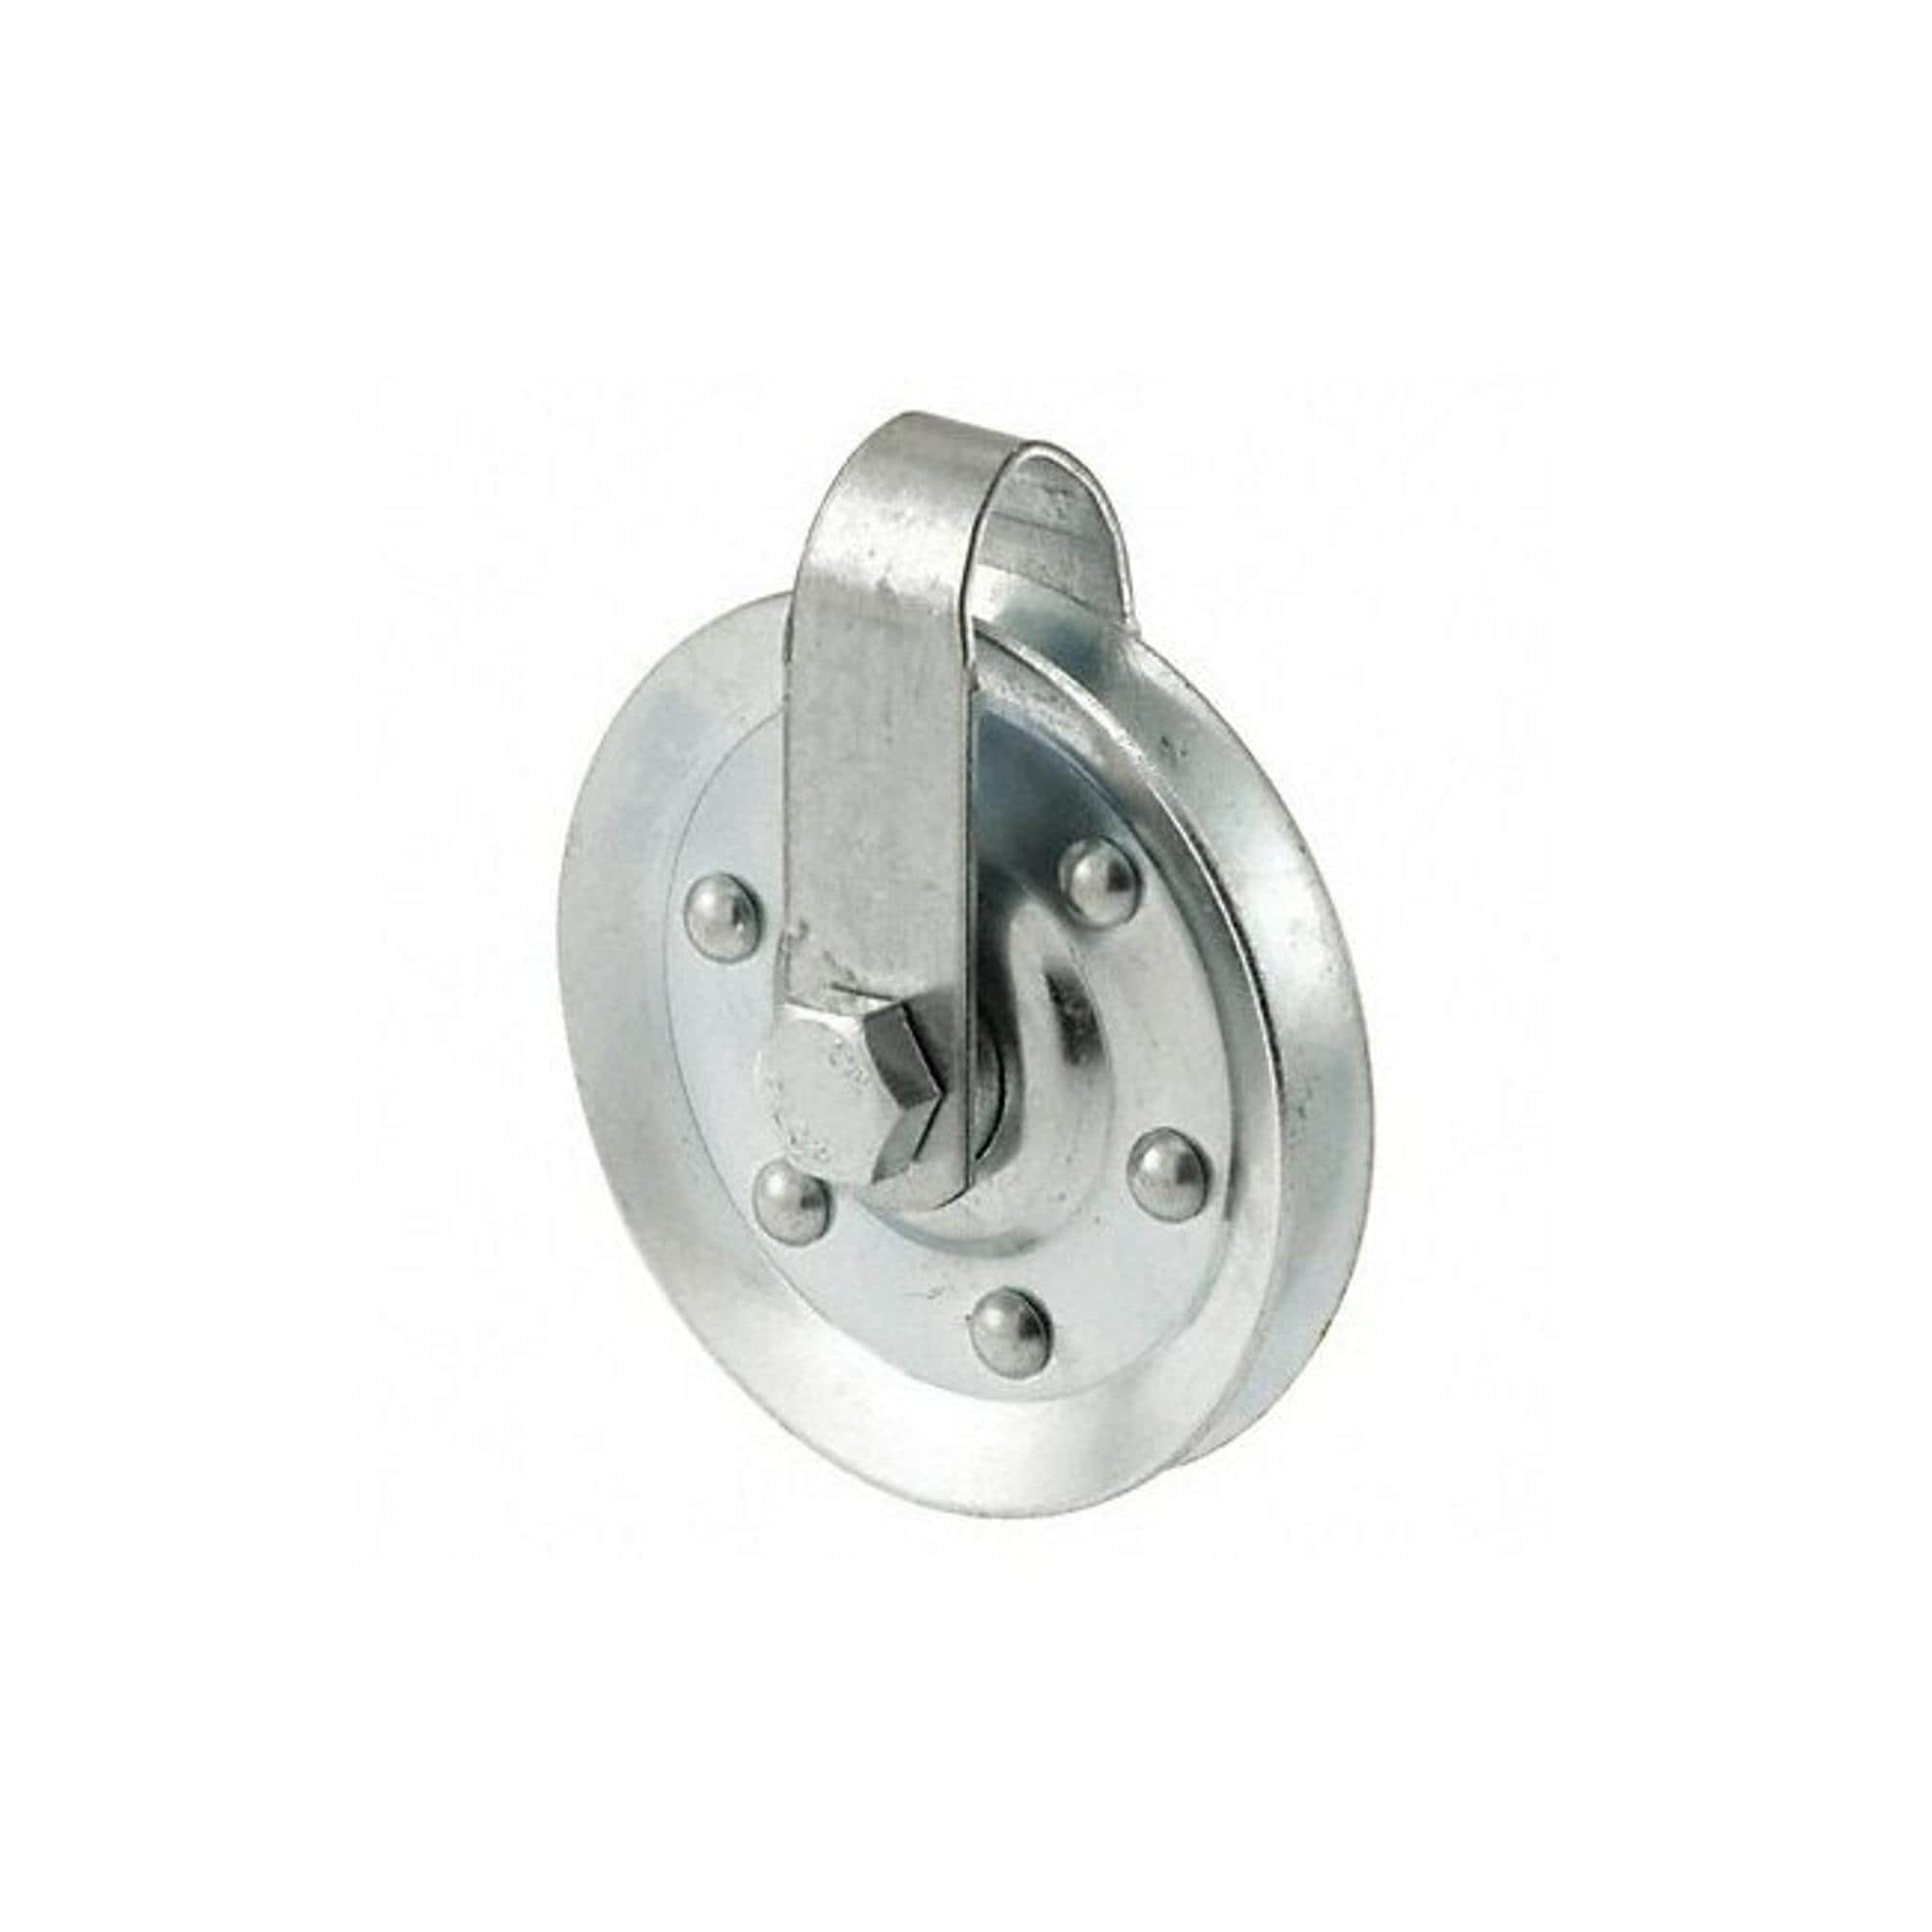 Primeline Tools Pulley Strap and Bolt,Steel,Silver...